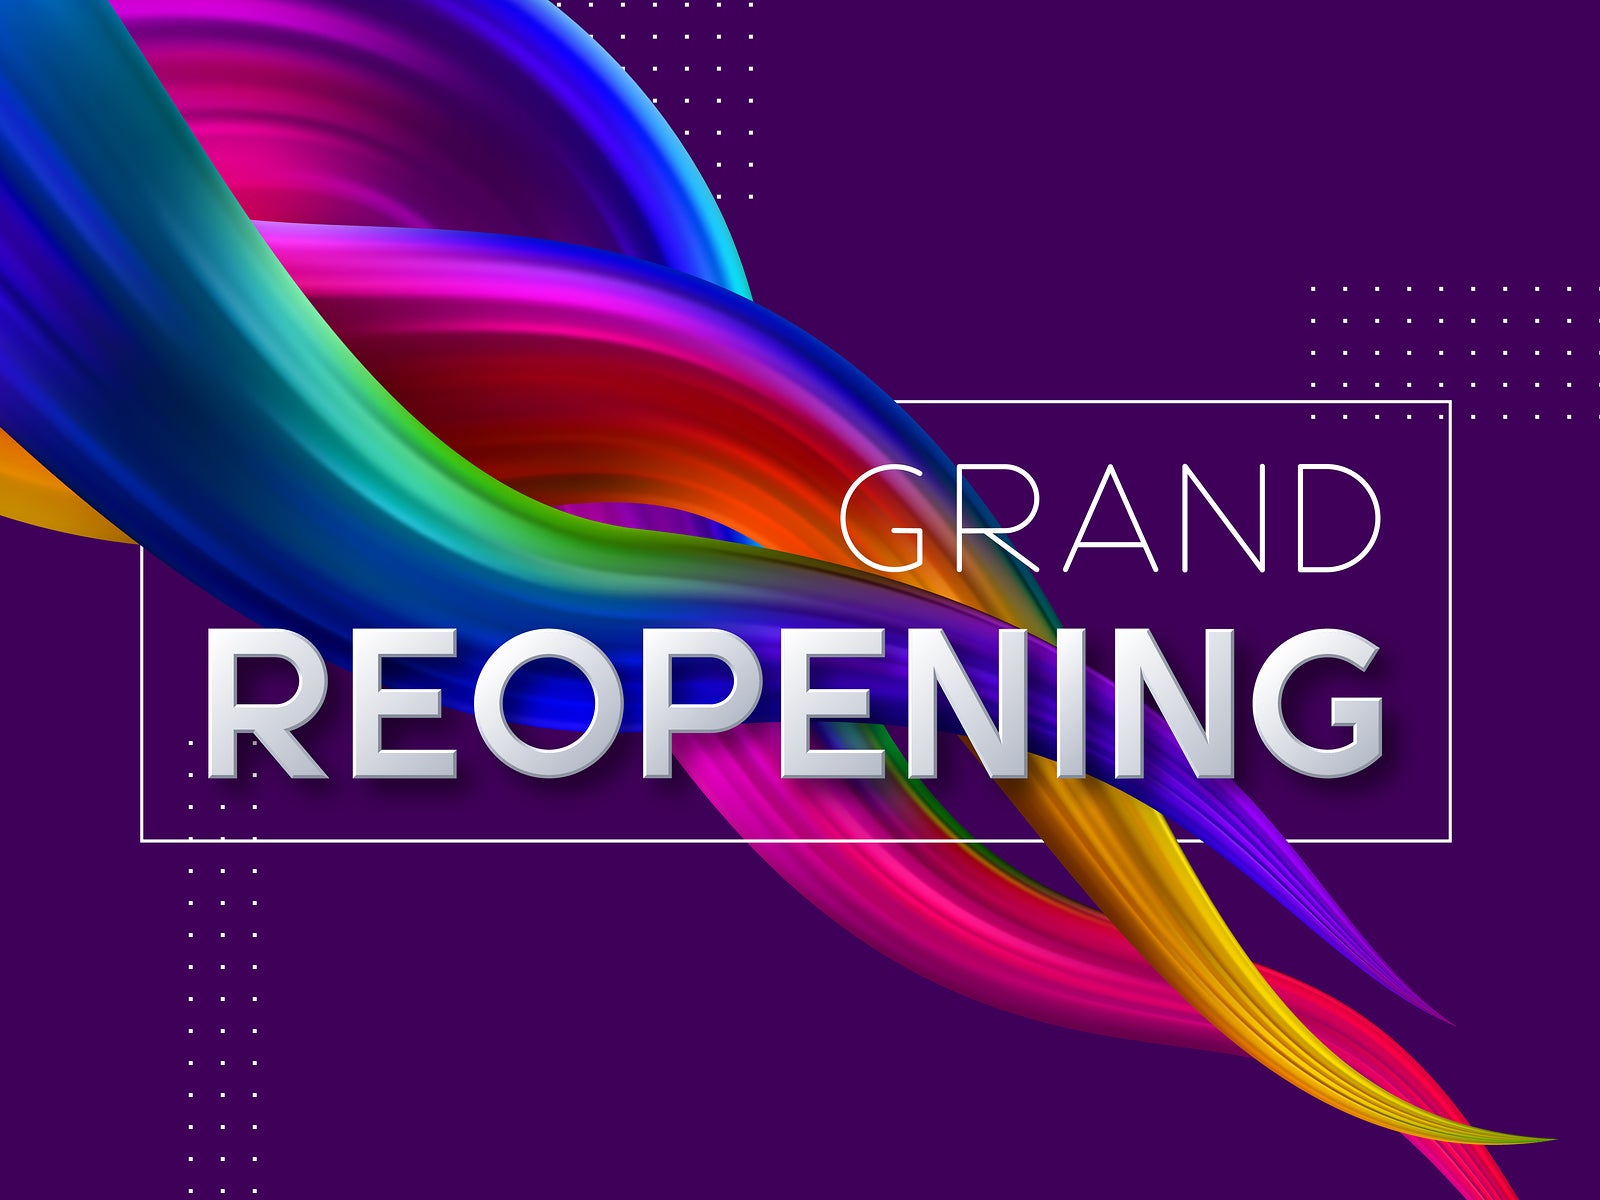 Grand reopening typographic design with 3d text and wave color flow liquid shapes. Opening ceremony vector illustration.